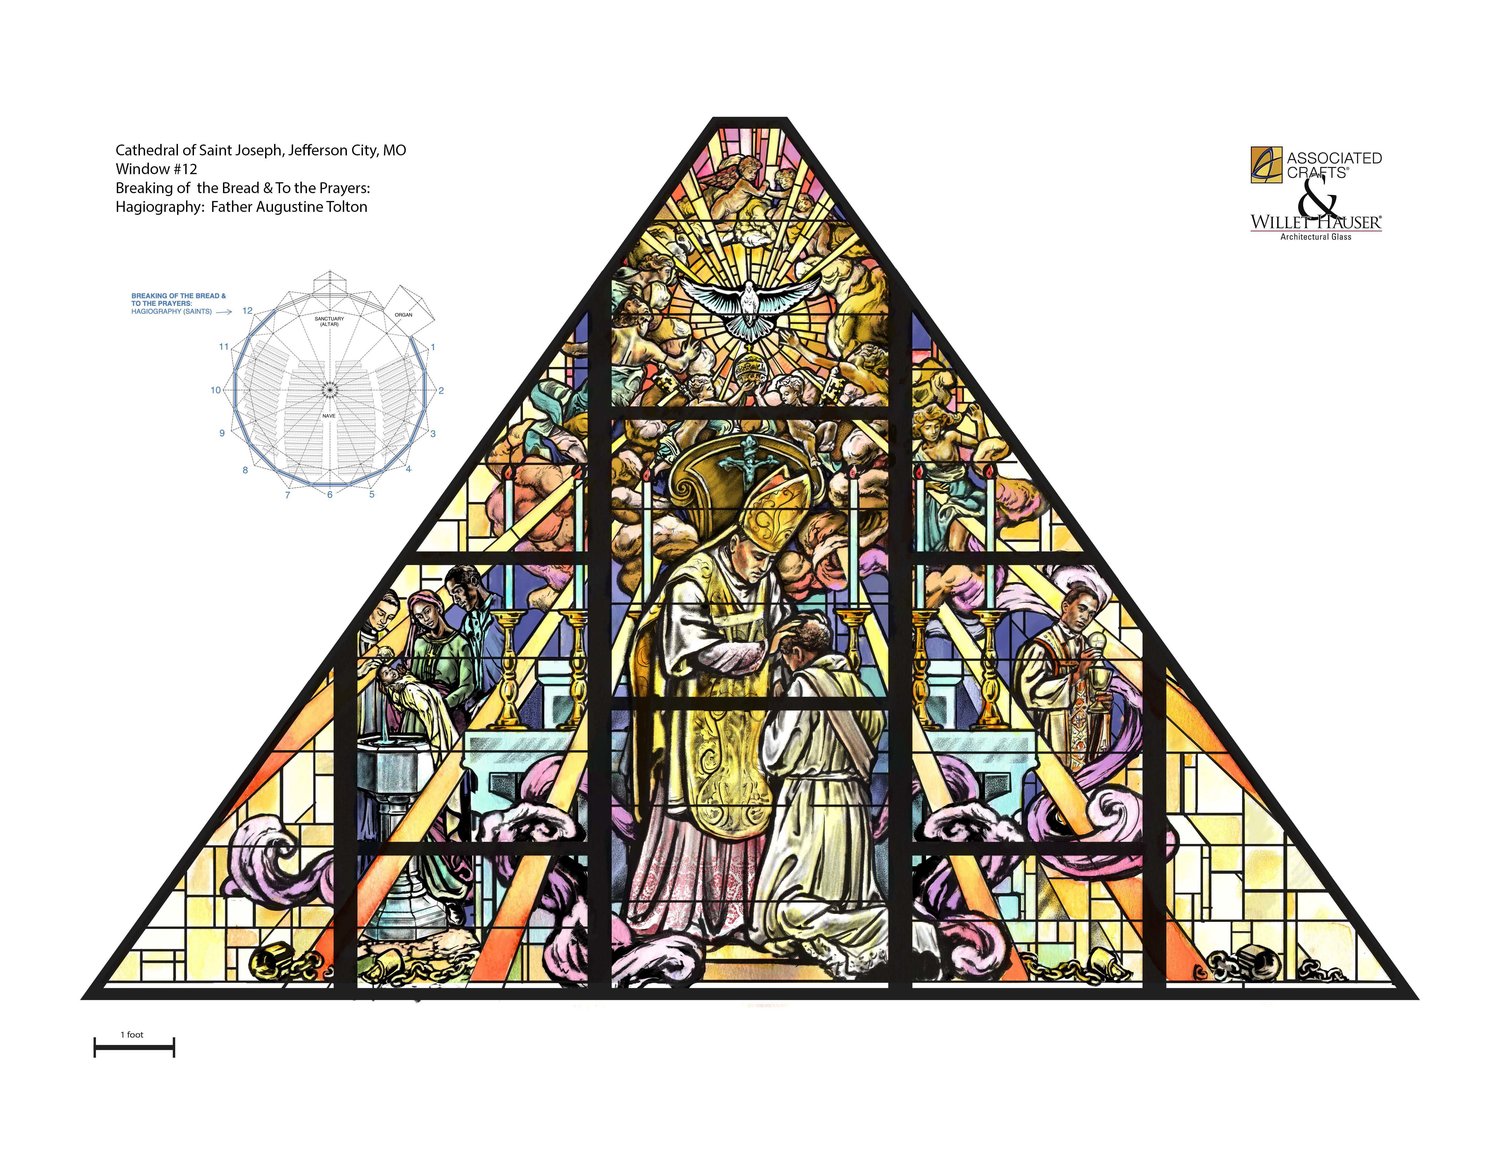 This is the final design from which artisans created the window depicting the Baptism, priestly ordination and First Solemn Mass of Venerable Father Augustus Tolton, who was born into slavery in northeastern Missouri and grew up to become the Roman Catholic Church's first recognizably Black priest in the United States.